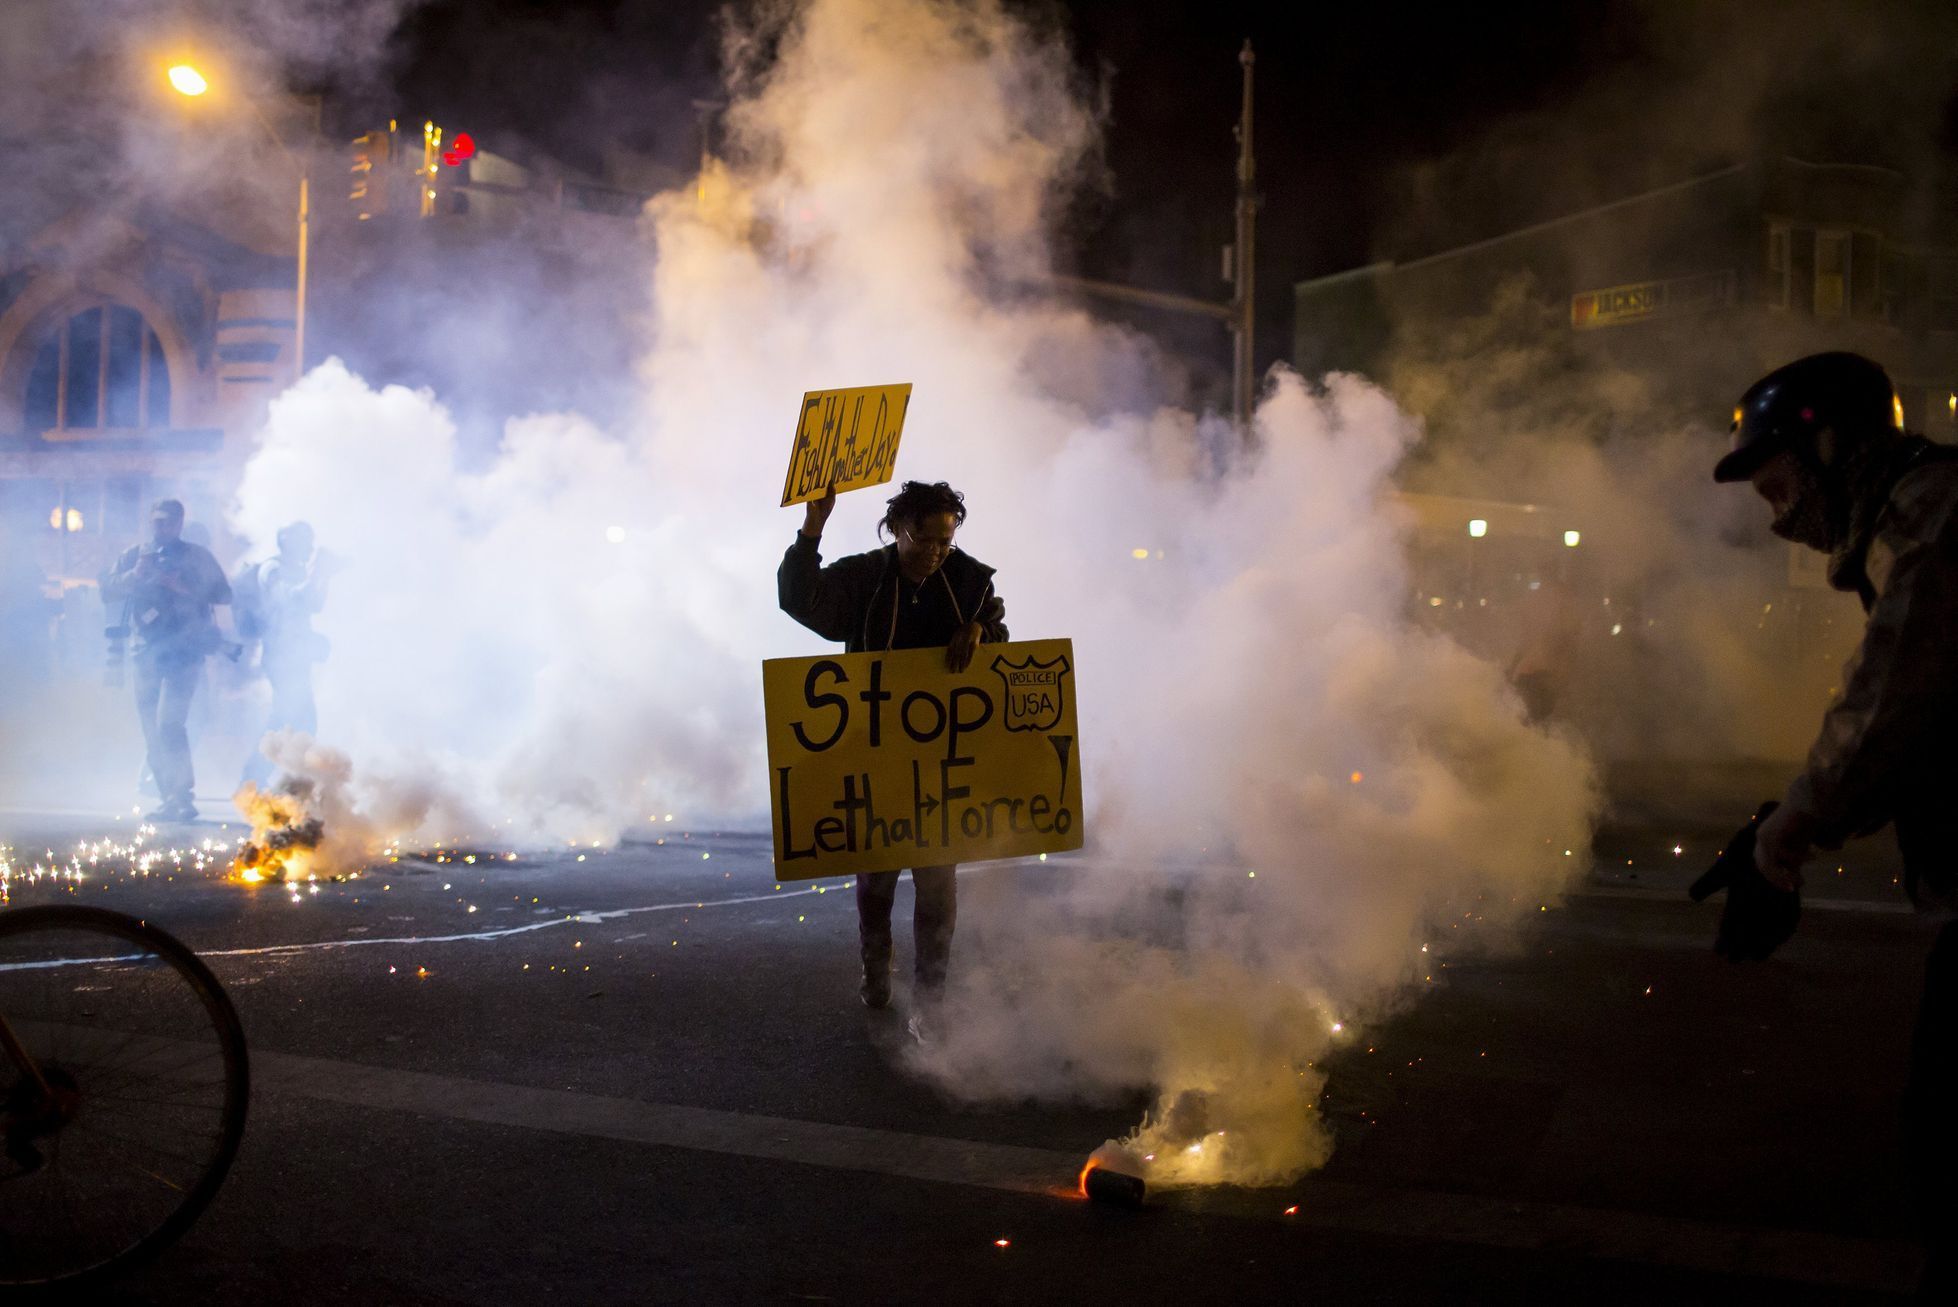 A protester holds a sign as clouds of smoke and crowd control agents rise, shortly after the deadline for a city-wide curfew passed in Baltimore, Maryland